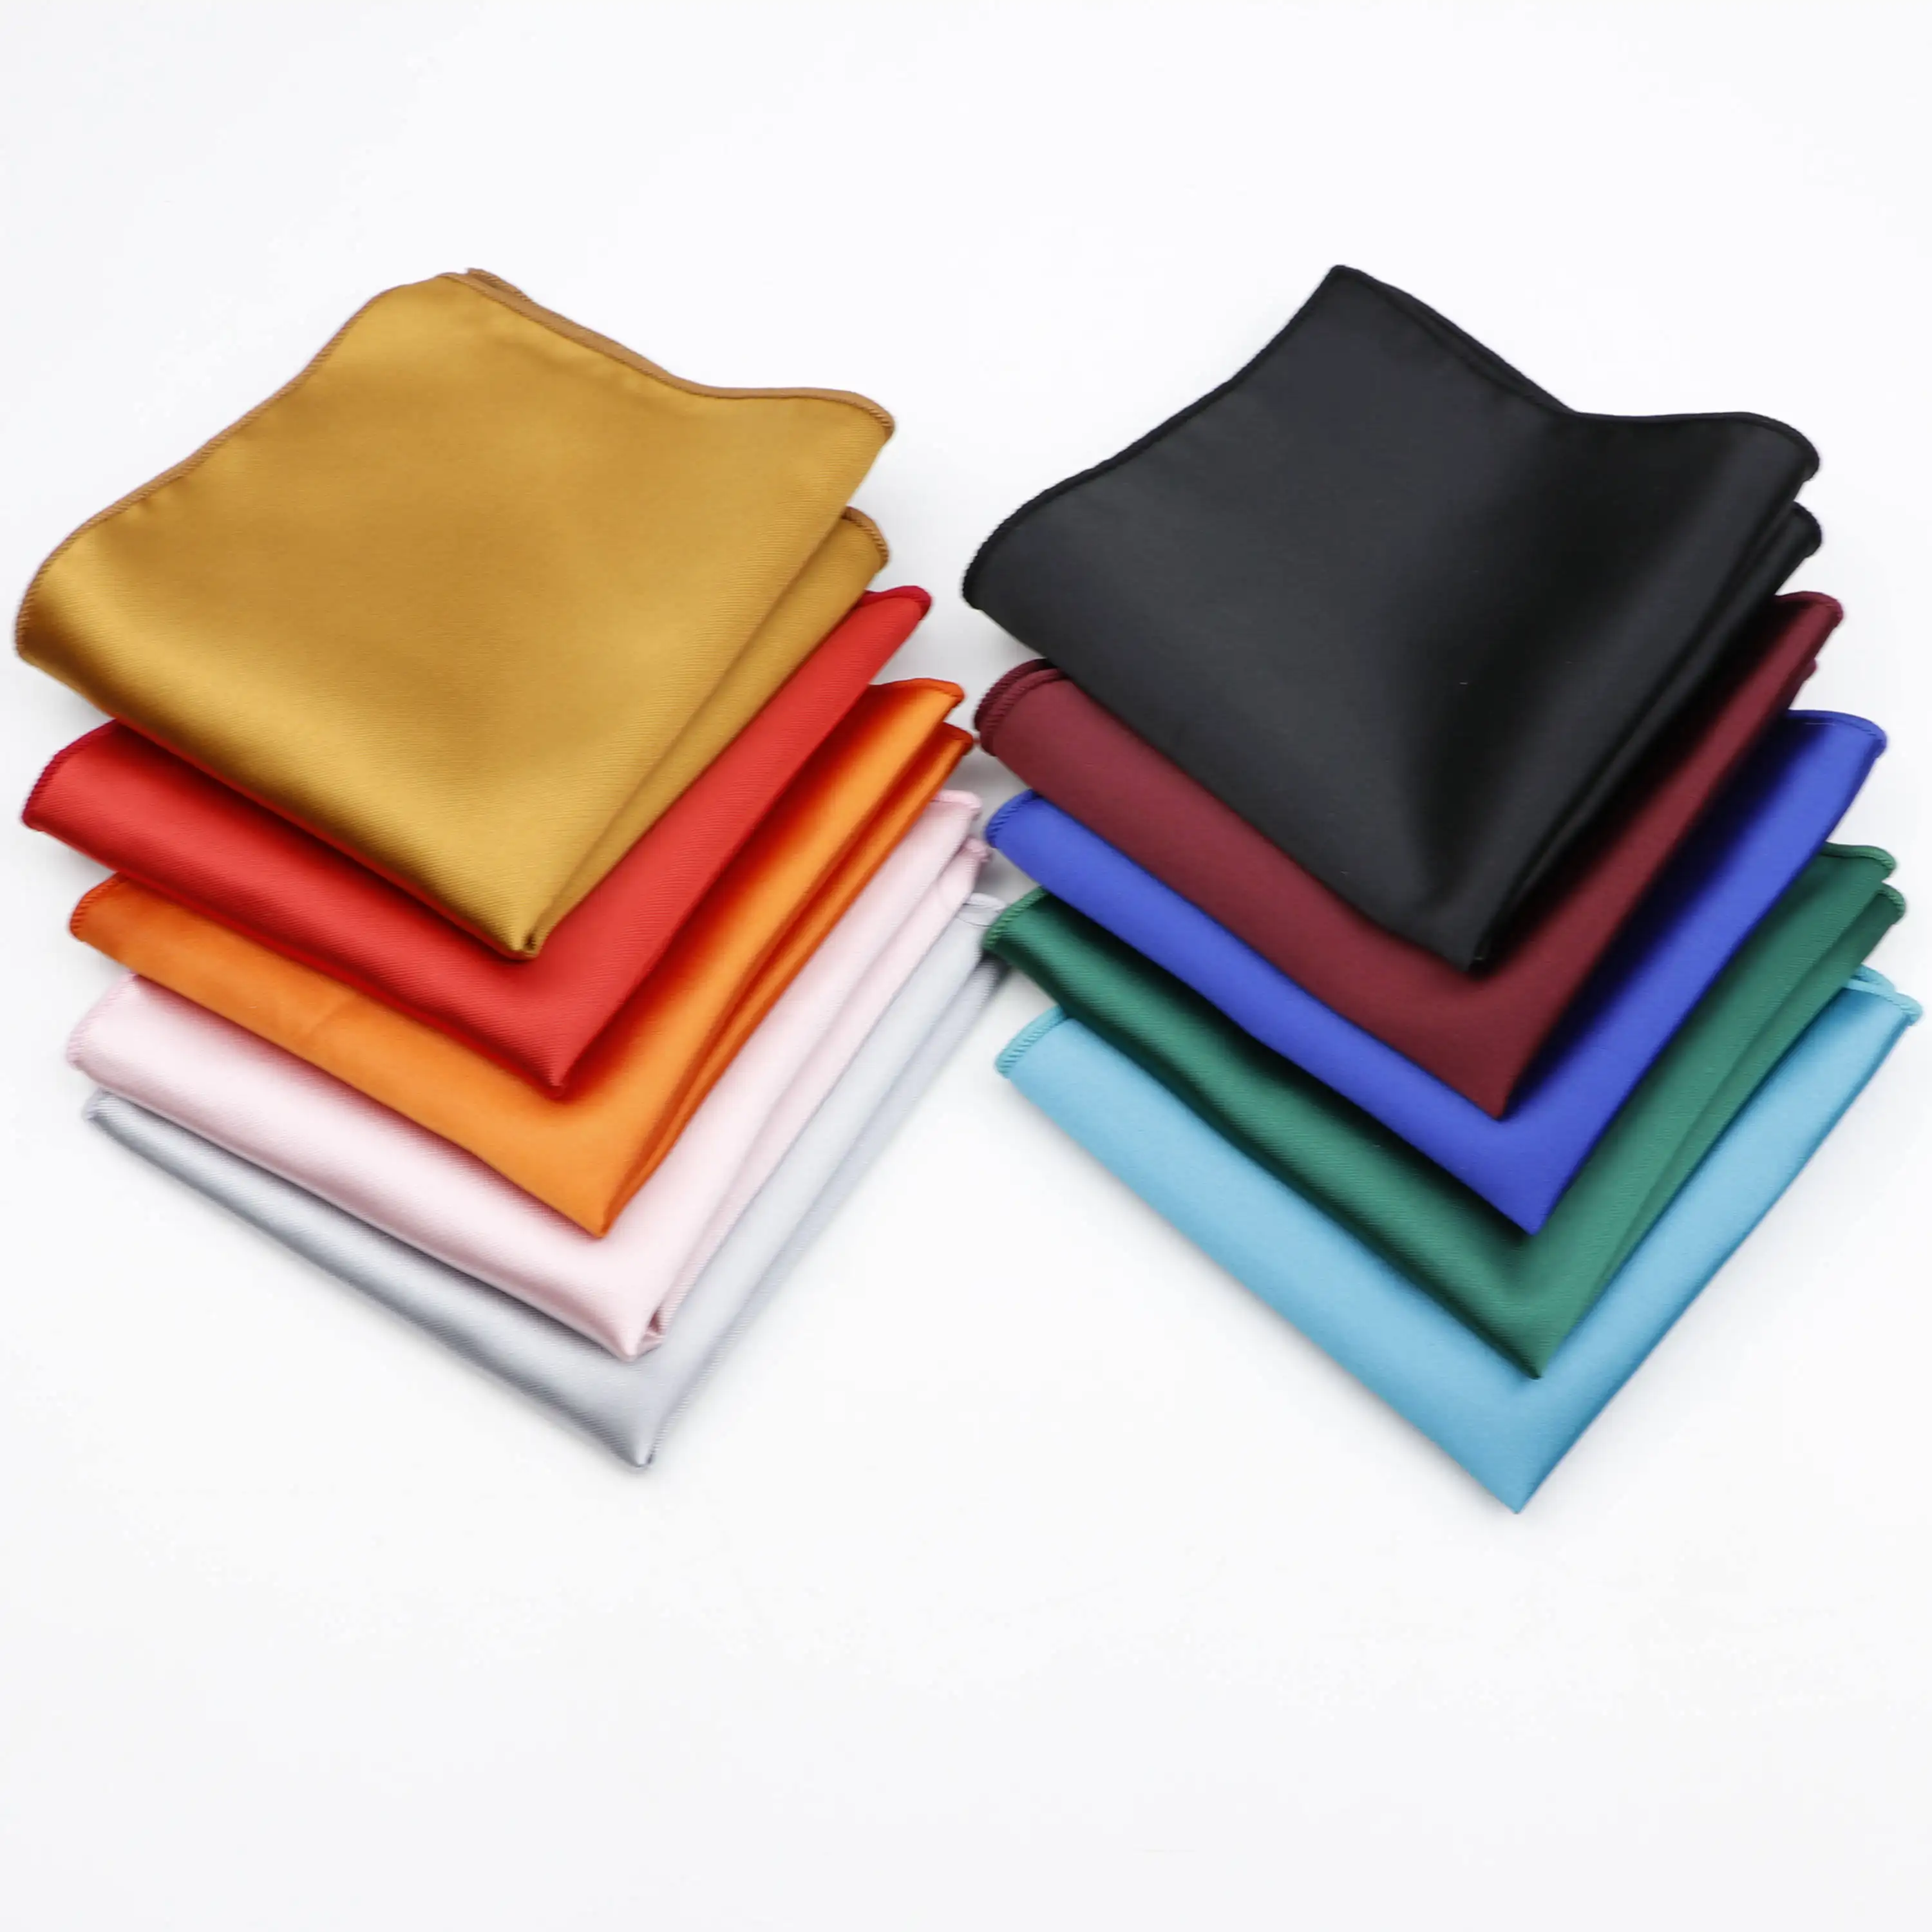 Men Suit Accessories Wedding Solid Color Handkerchief High Quality Polyester Hanky Plain Satin Pocket Square